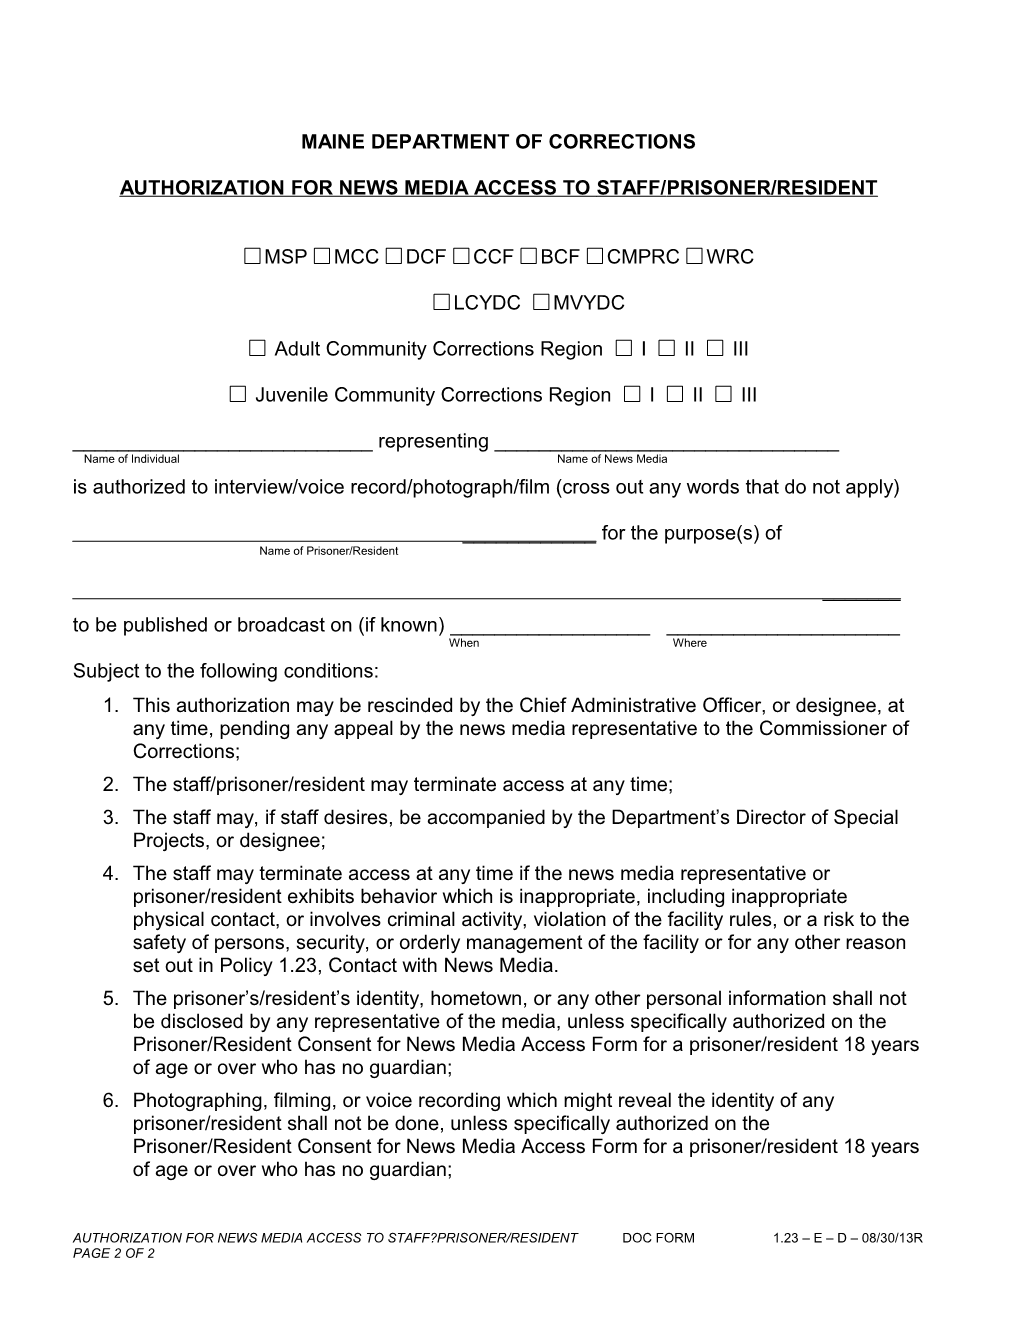 Authorization for Media Access